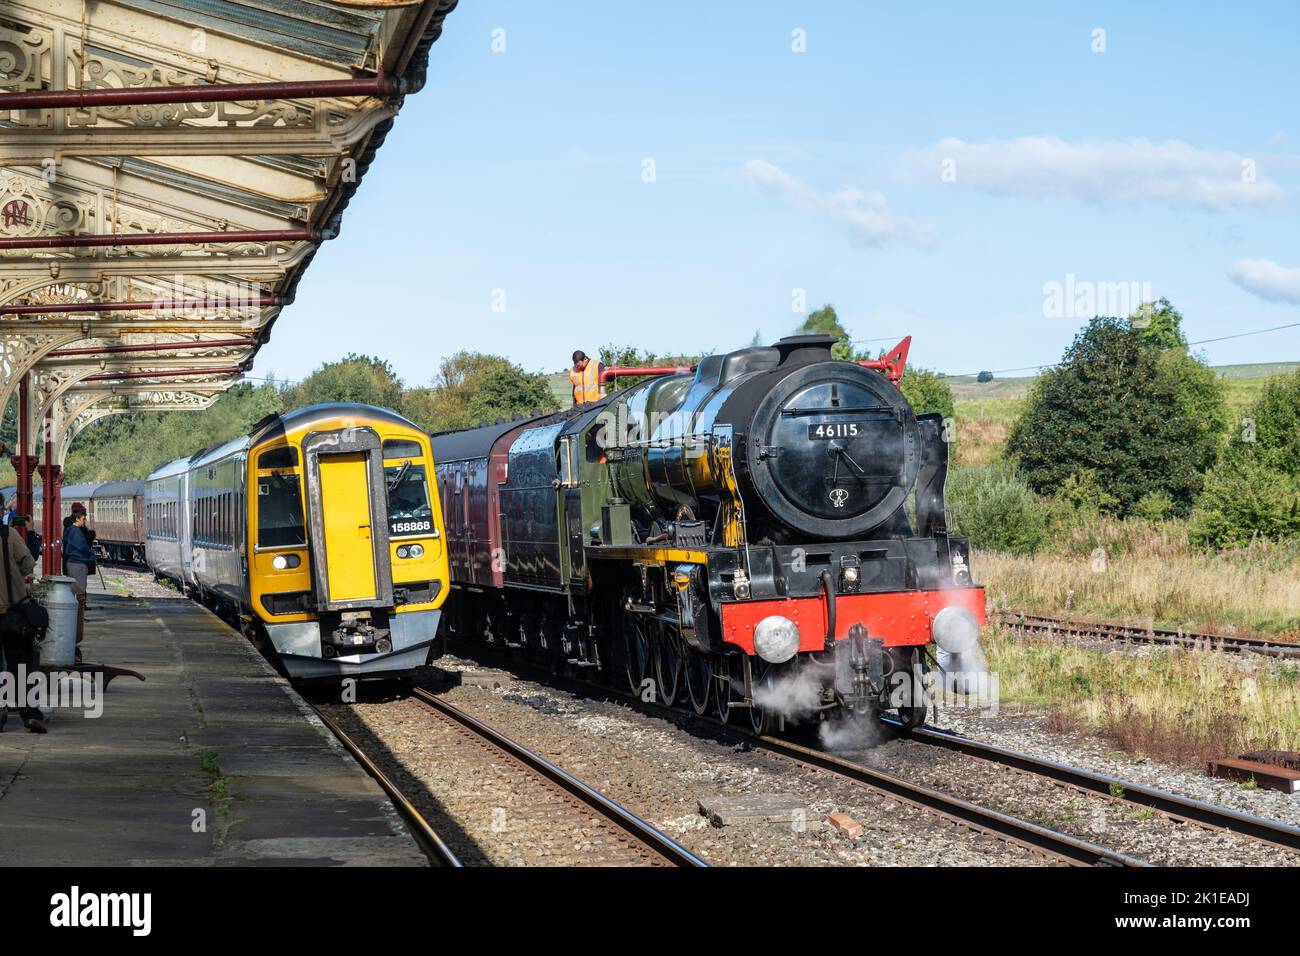 The LMS Royal Scot class 46115 Scots Guardsman and a modern diesel train at Hellifield station, Yorkshire Stock Photo